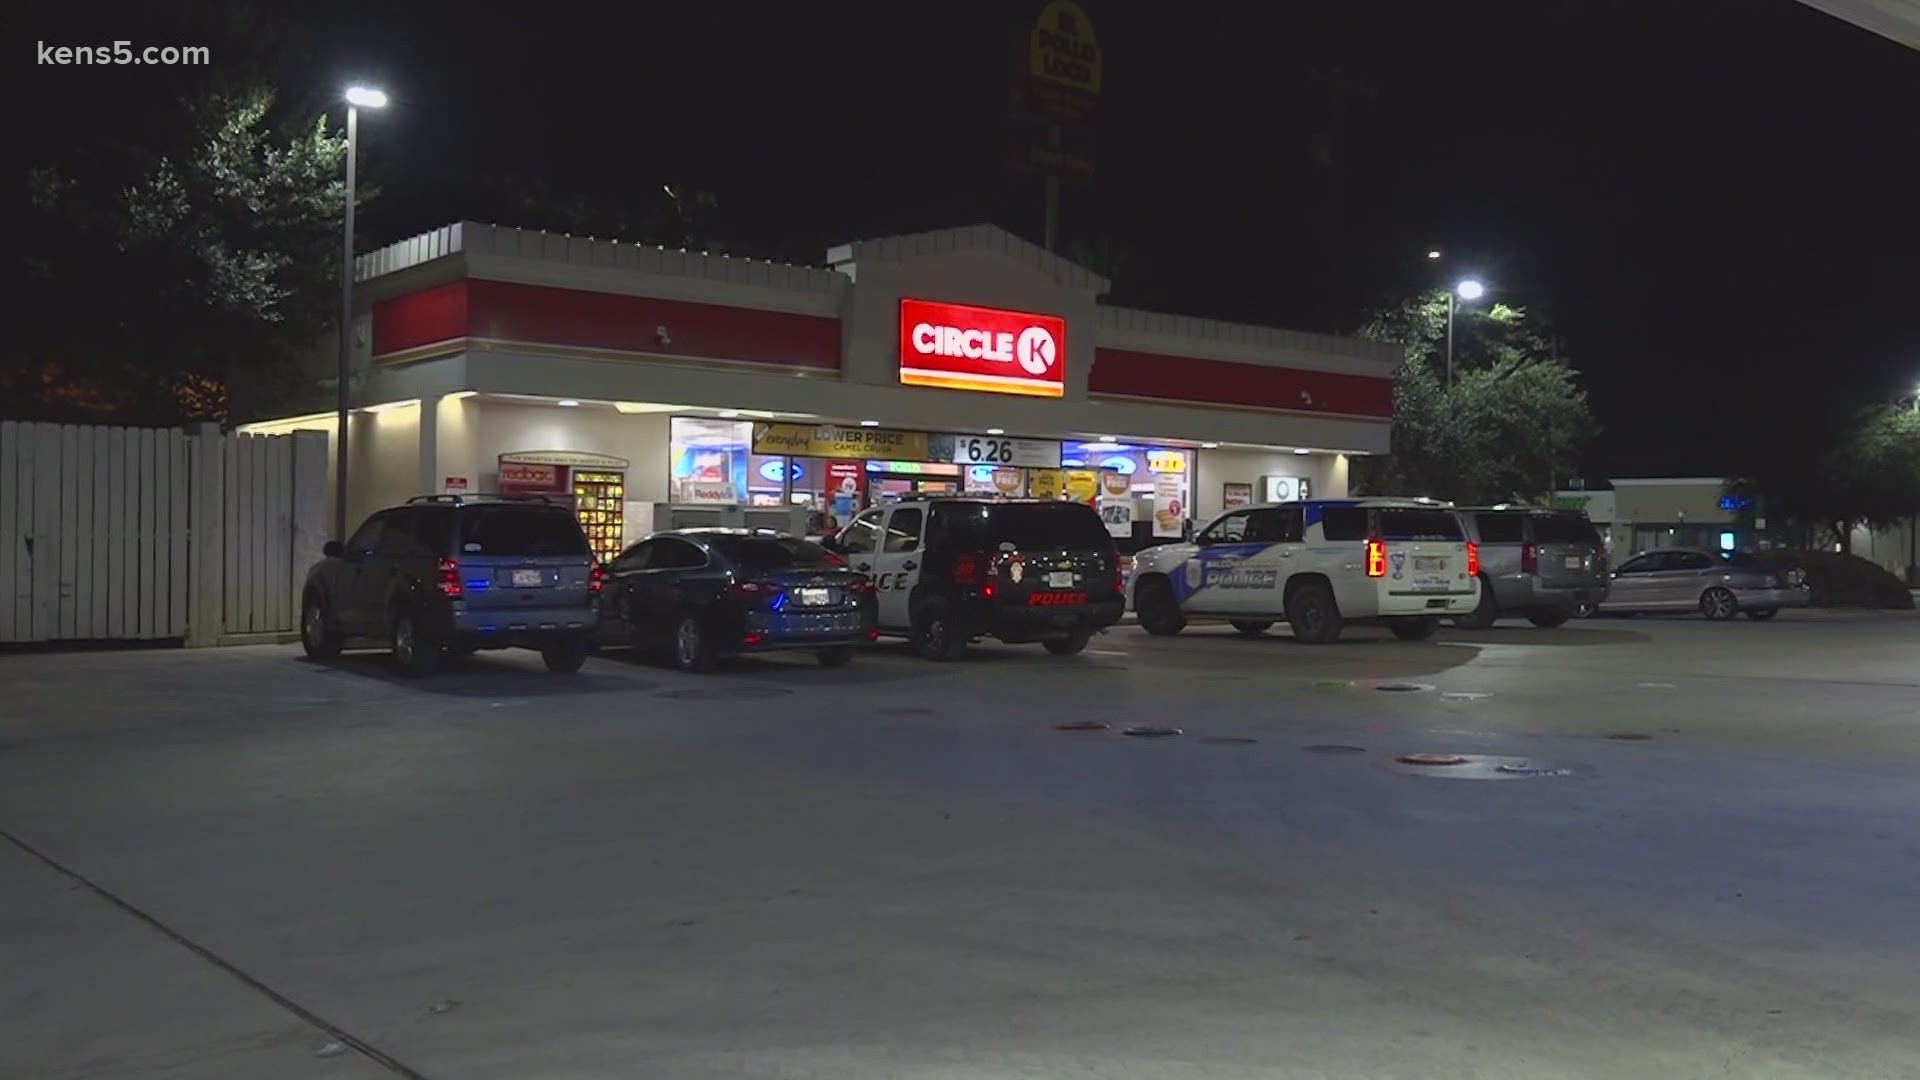 Police said both robberies had a matching suspect who was wearing dark clothing, held the cashier at gunpoint and possibly driving a dark Chevy car.